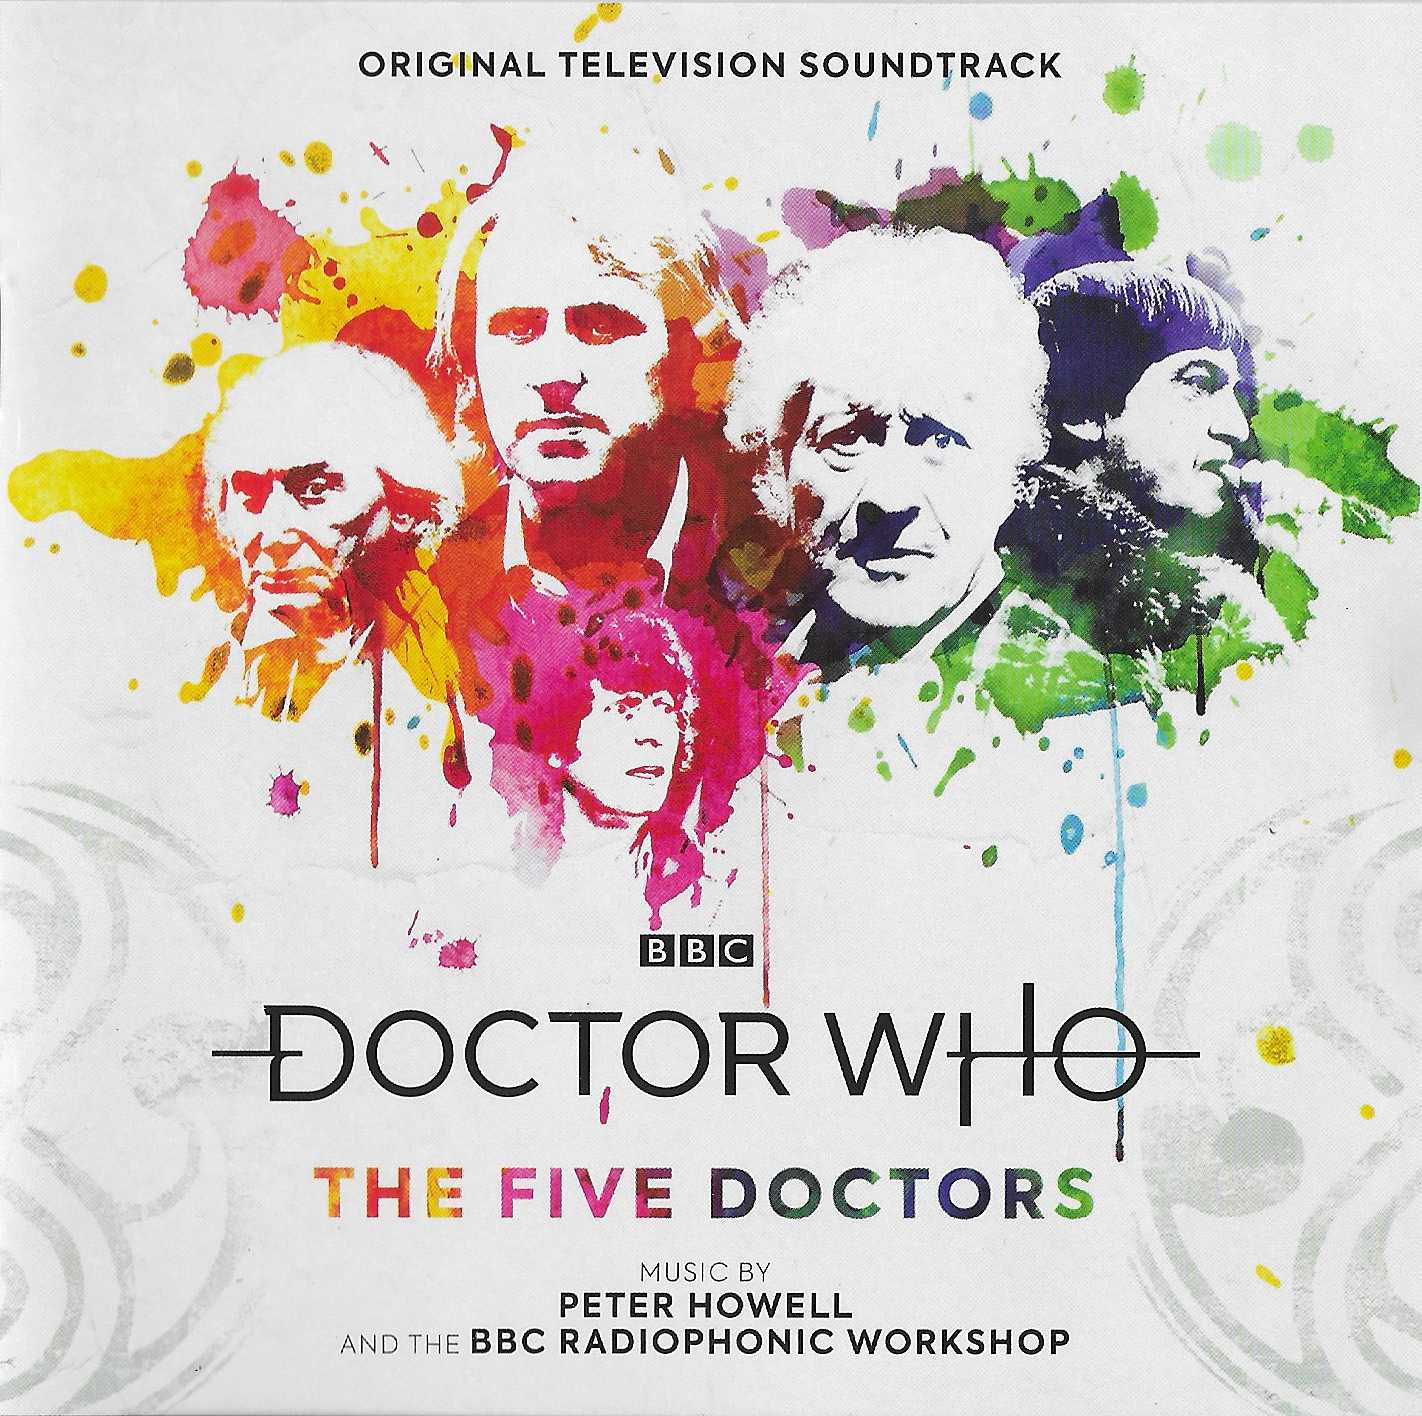 Picture of SILCD 1553 Doctor Who - The five Doctors by artist Peter Howell from the BBC records and Tapes library